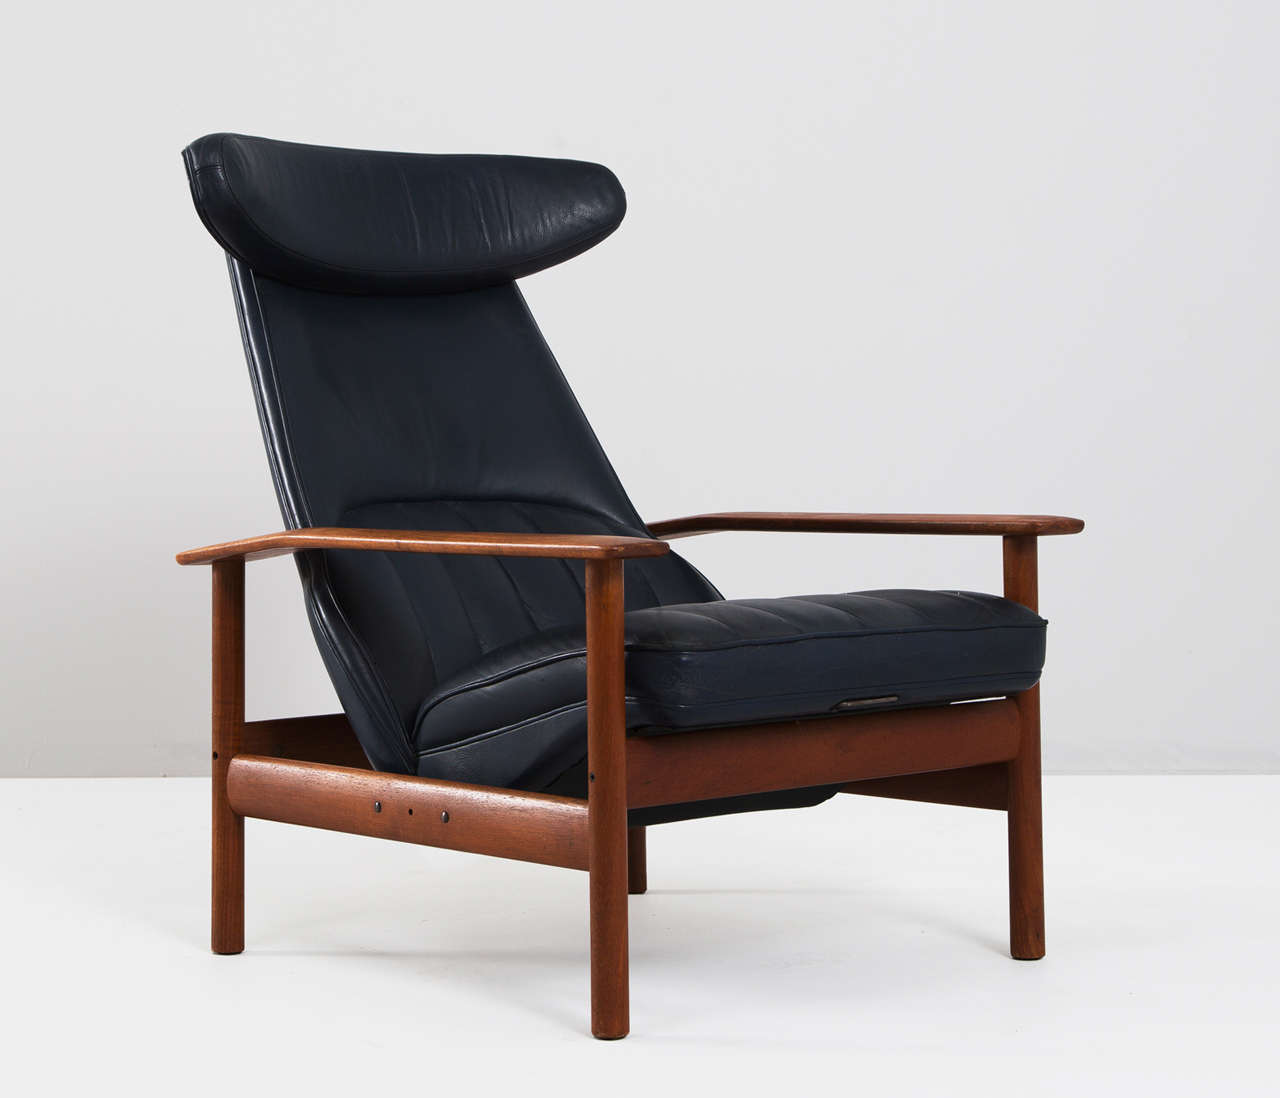 Beautiful Easy chair by Sven Ivar Dysthe with solid teak frame.
The chair is adjustable in two positions to maximize comfort.

The seat is covered in its original dark blue skai in a 'channeled' technique
which gives these chairs a very nice and